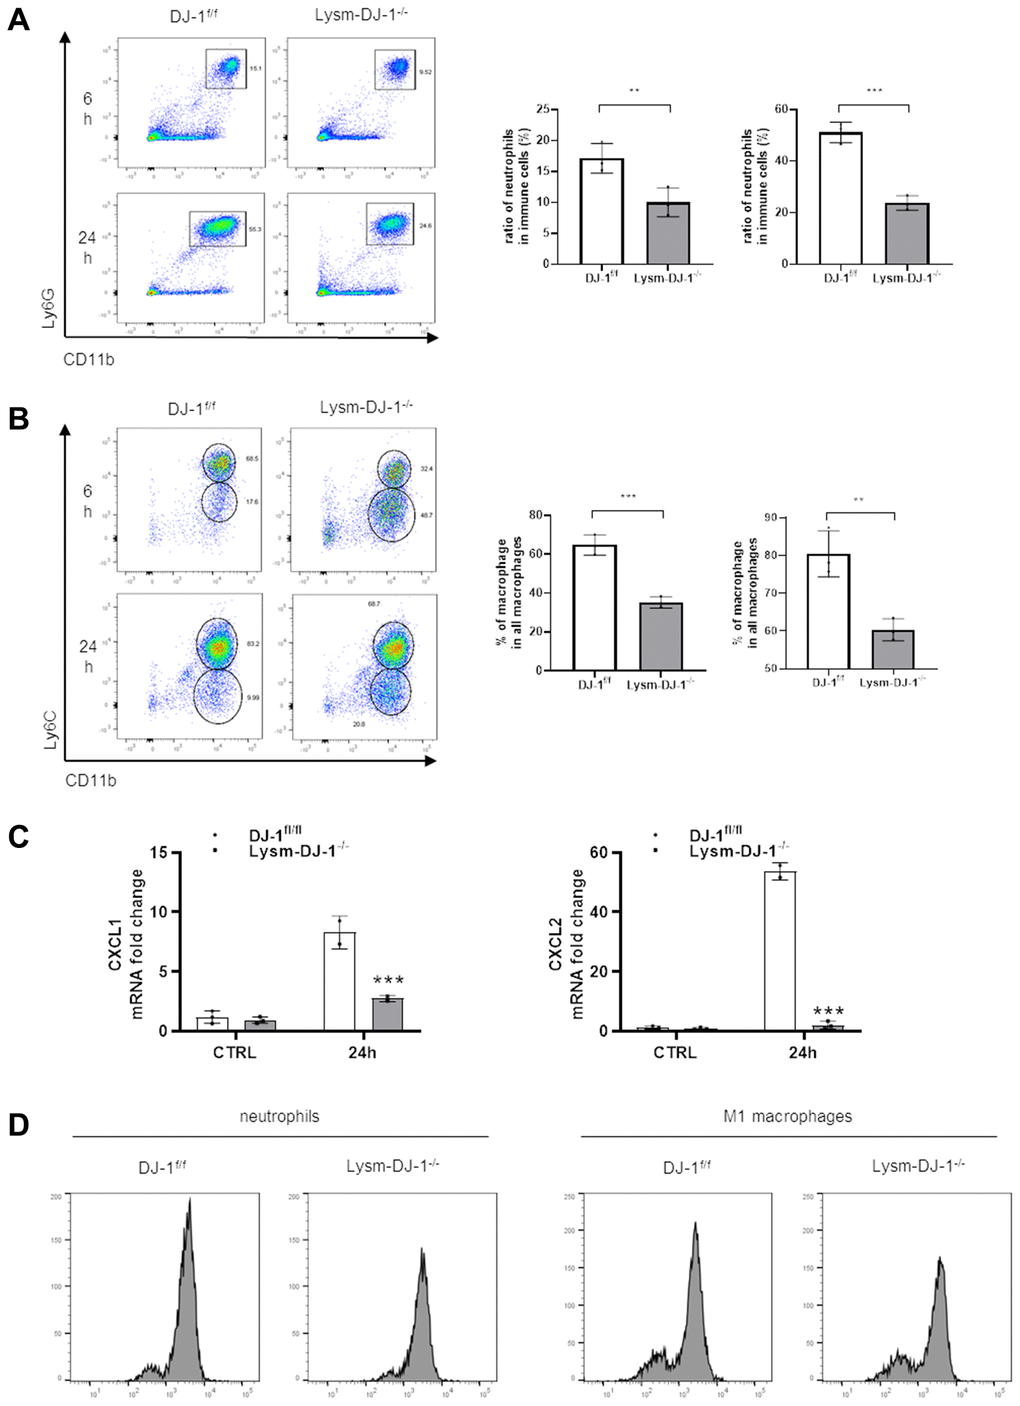 Myeloid DJ-1 deficiency attenuates APAP induced hepatic inflammatory reaction via less ROS production and chemokines induction. Fasted DJ-1fl/fl and Lysm-DJ-1−/− mice were intraperitoneal injected with a single dose of 300 mg/kg of APAP. Quantification of Ly6G+CD11b+ neutrophils (A) and Ly6C+CD11b+ macrophages (B) by flow cytometry (n = 4). (C) Quantification of CXCL1 and CXCL2 expression in liver tissue 24 h after APAP challenge (n = 5–8). (D) Quantification of cellular ROS levels by oxidized DCFDA and flow cytometry in neutrophils and macrophages isolated from DJ-1fl/fl and Lysm-DJ-1−/− mice (n = 4). Data are shown as the means ± SD, *P **P ***P ****P 